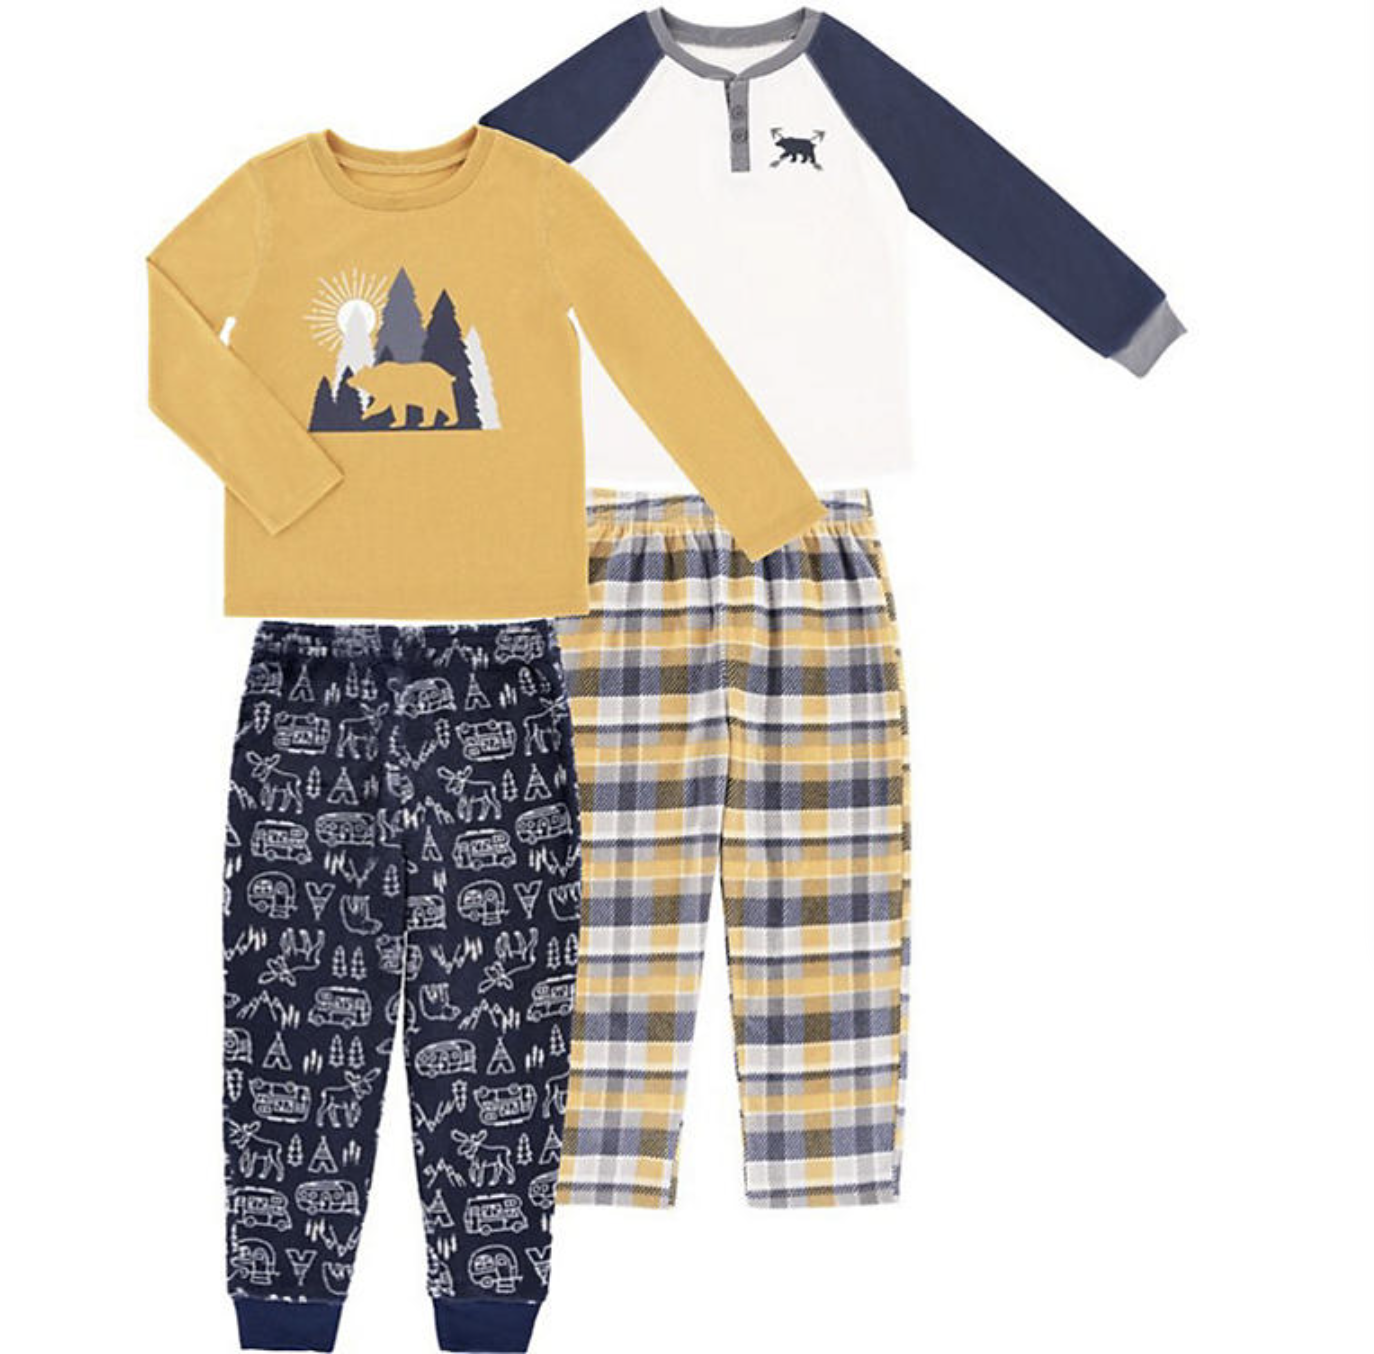 the PJs in woodland and dinosaur patterns